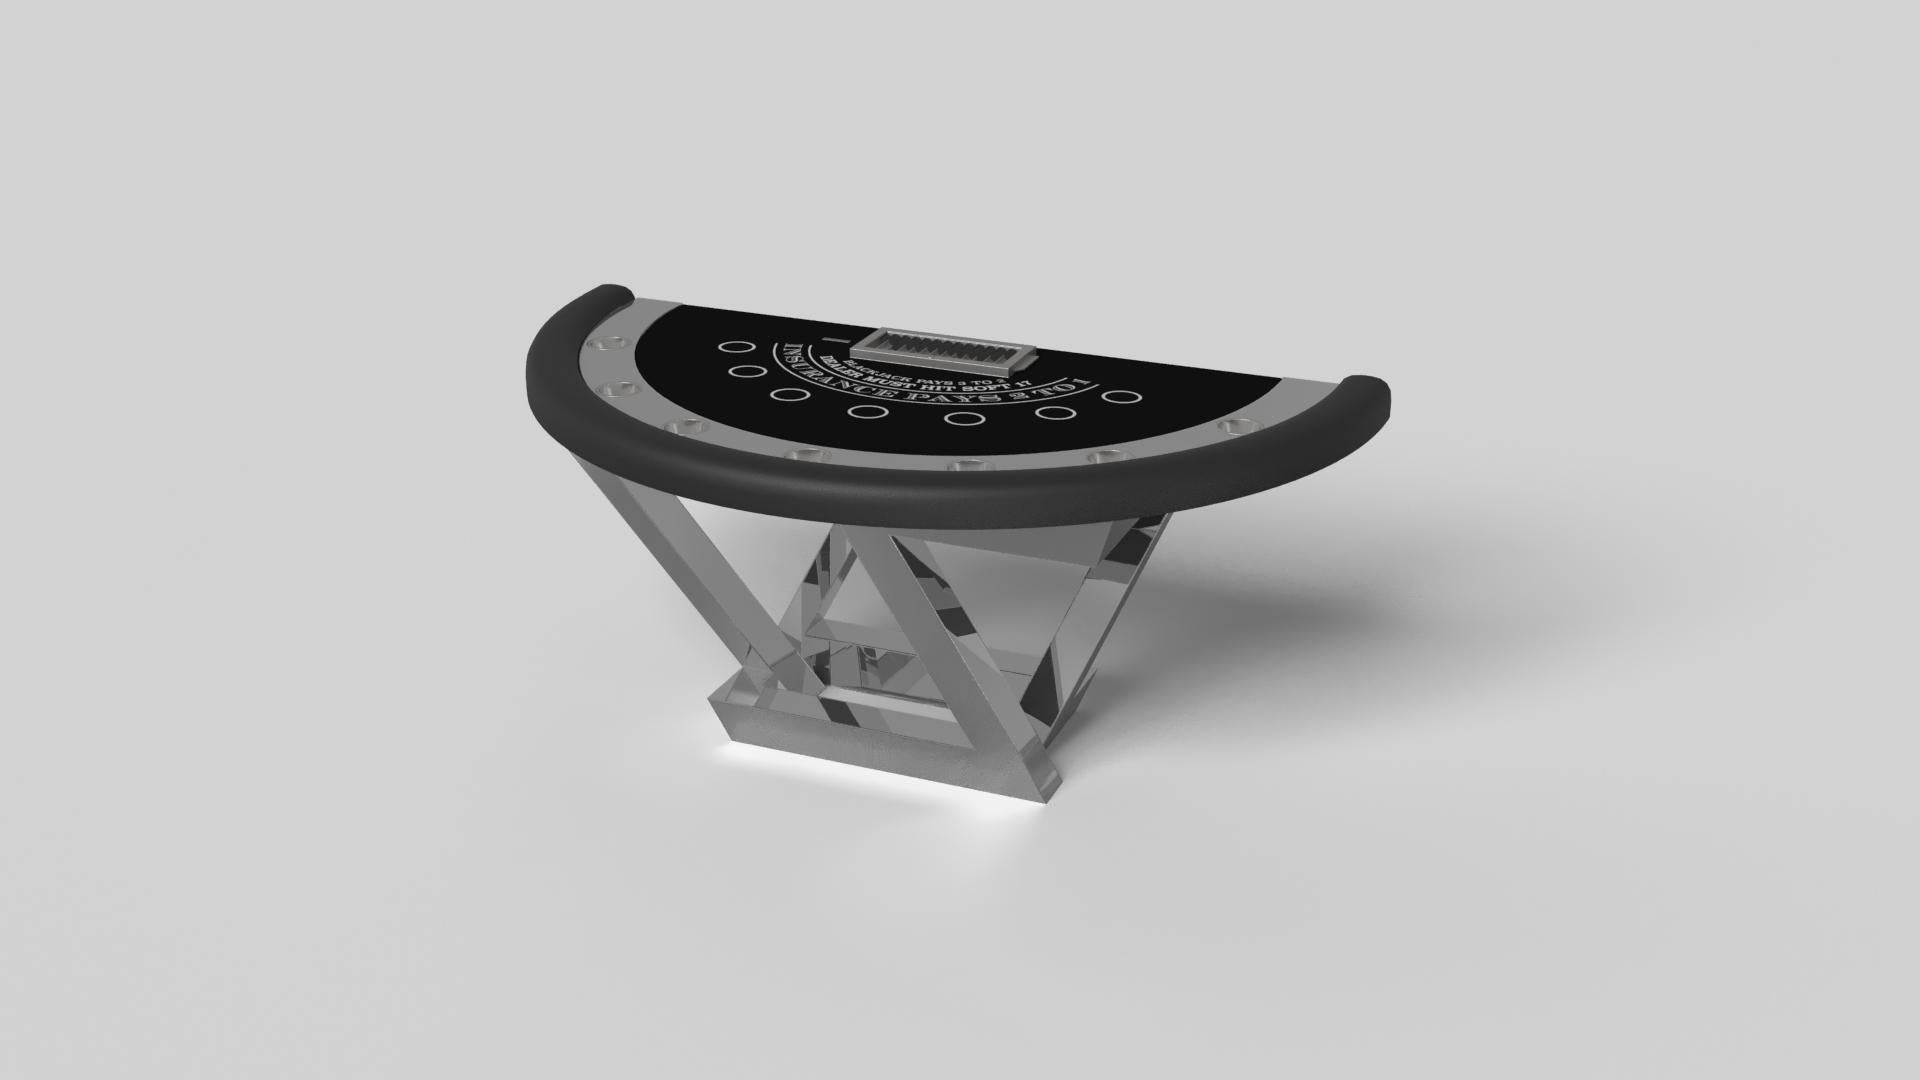 A contemporary composition of clean lines and sleek edges, the Trinity blackjack table in Black is an elegant expression of modern design. Handcrafted in a semicircular design with a chip rack and betting circles, this table offers statement-making